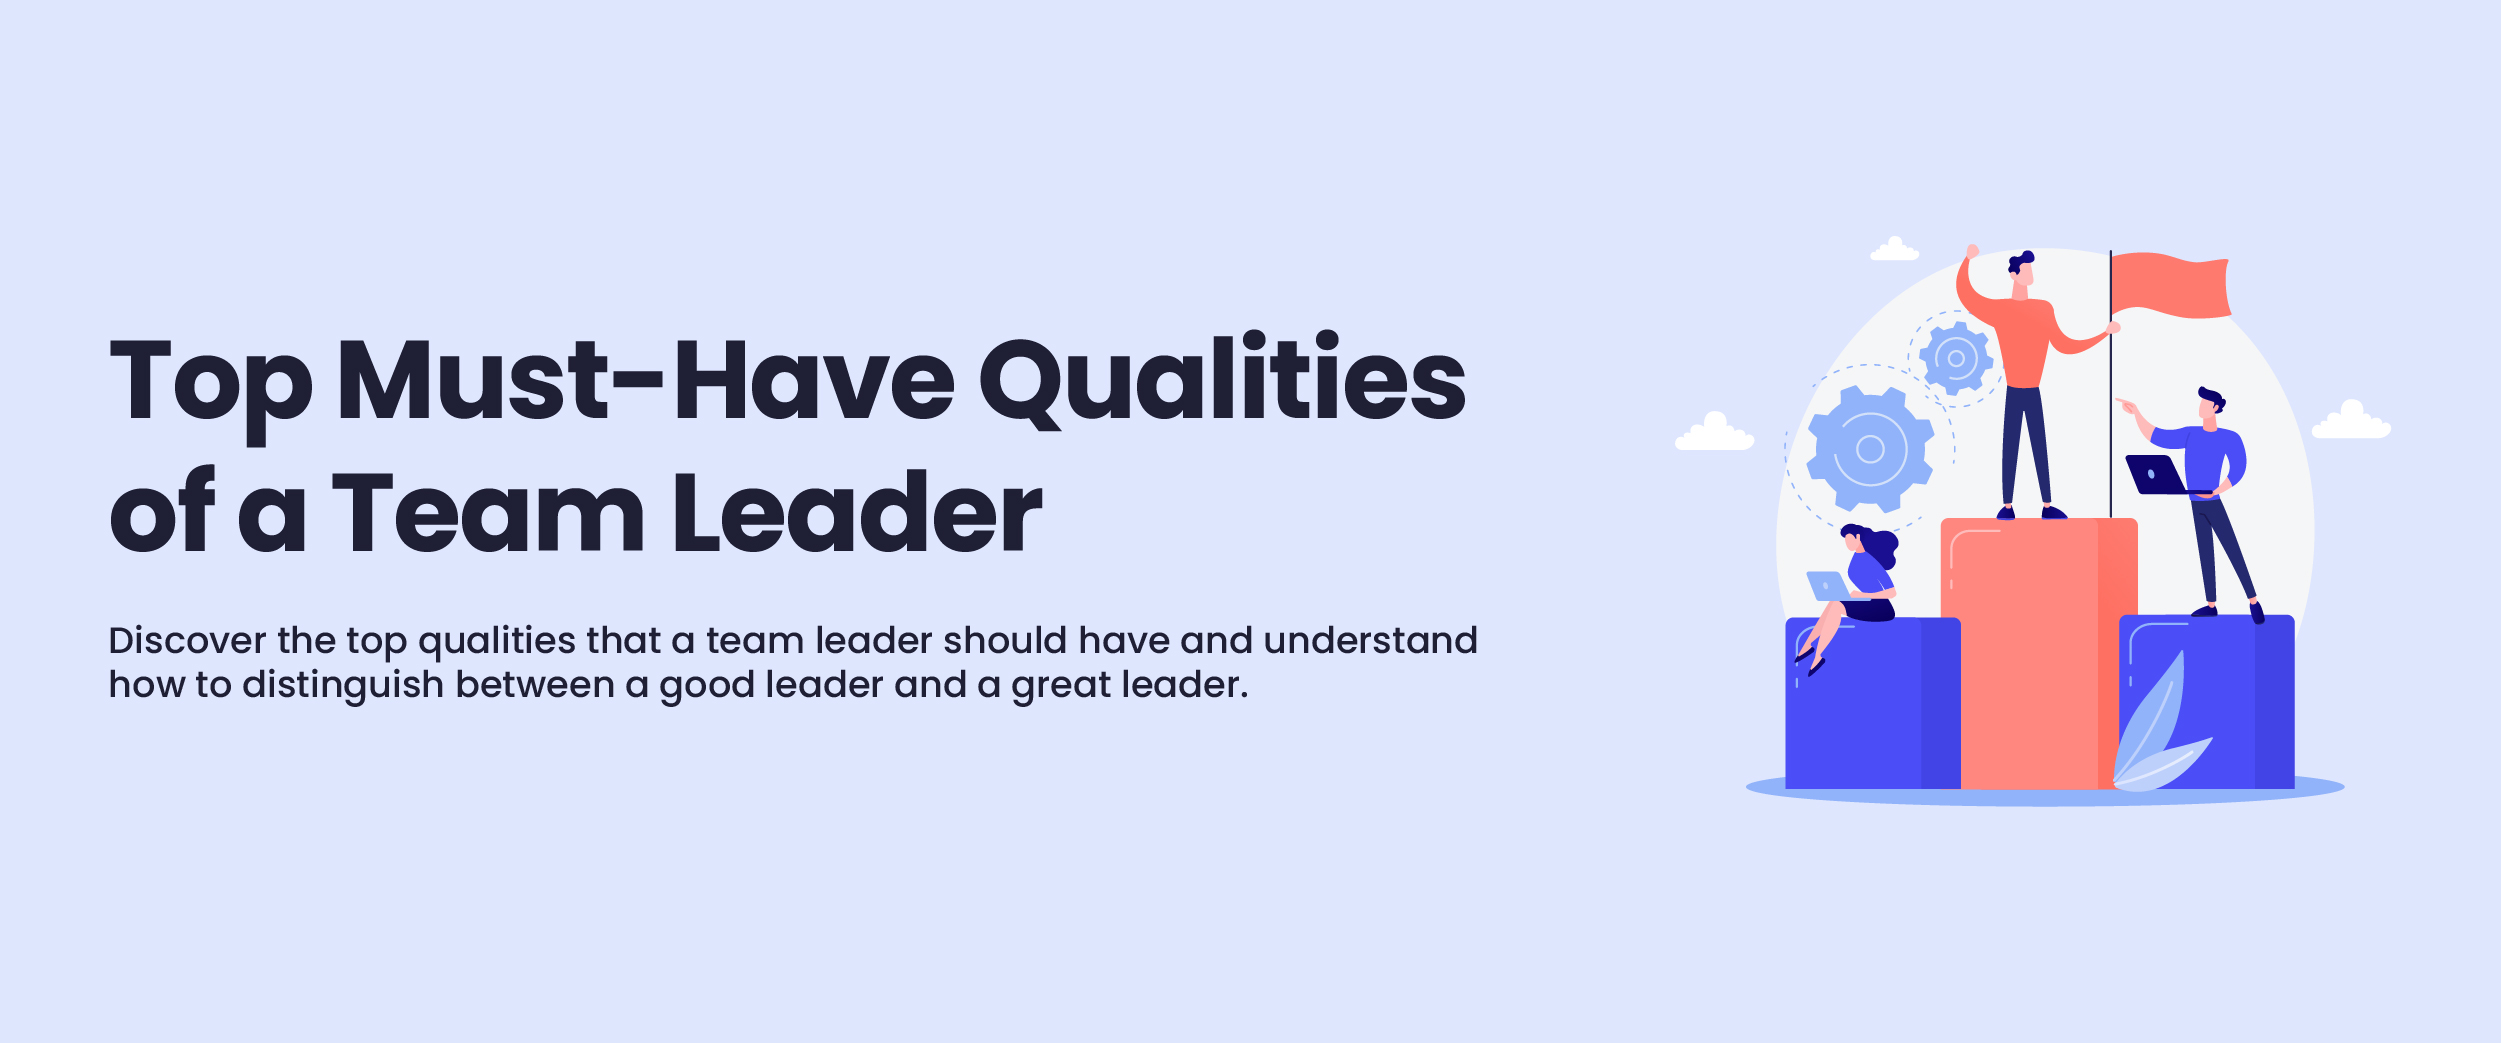 Qualities of a Team Leader